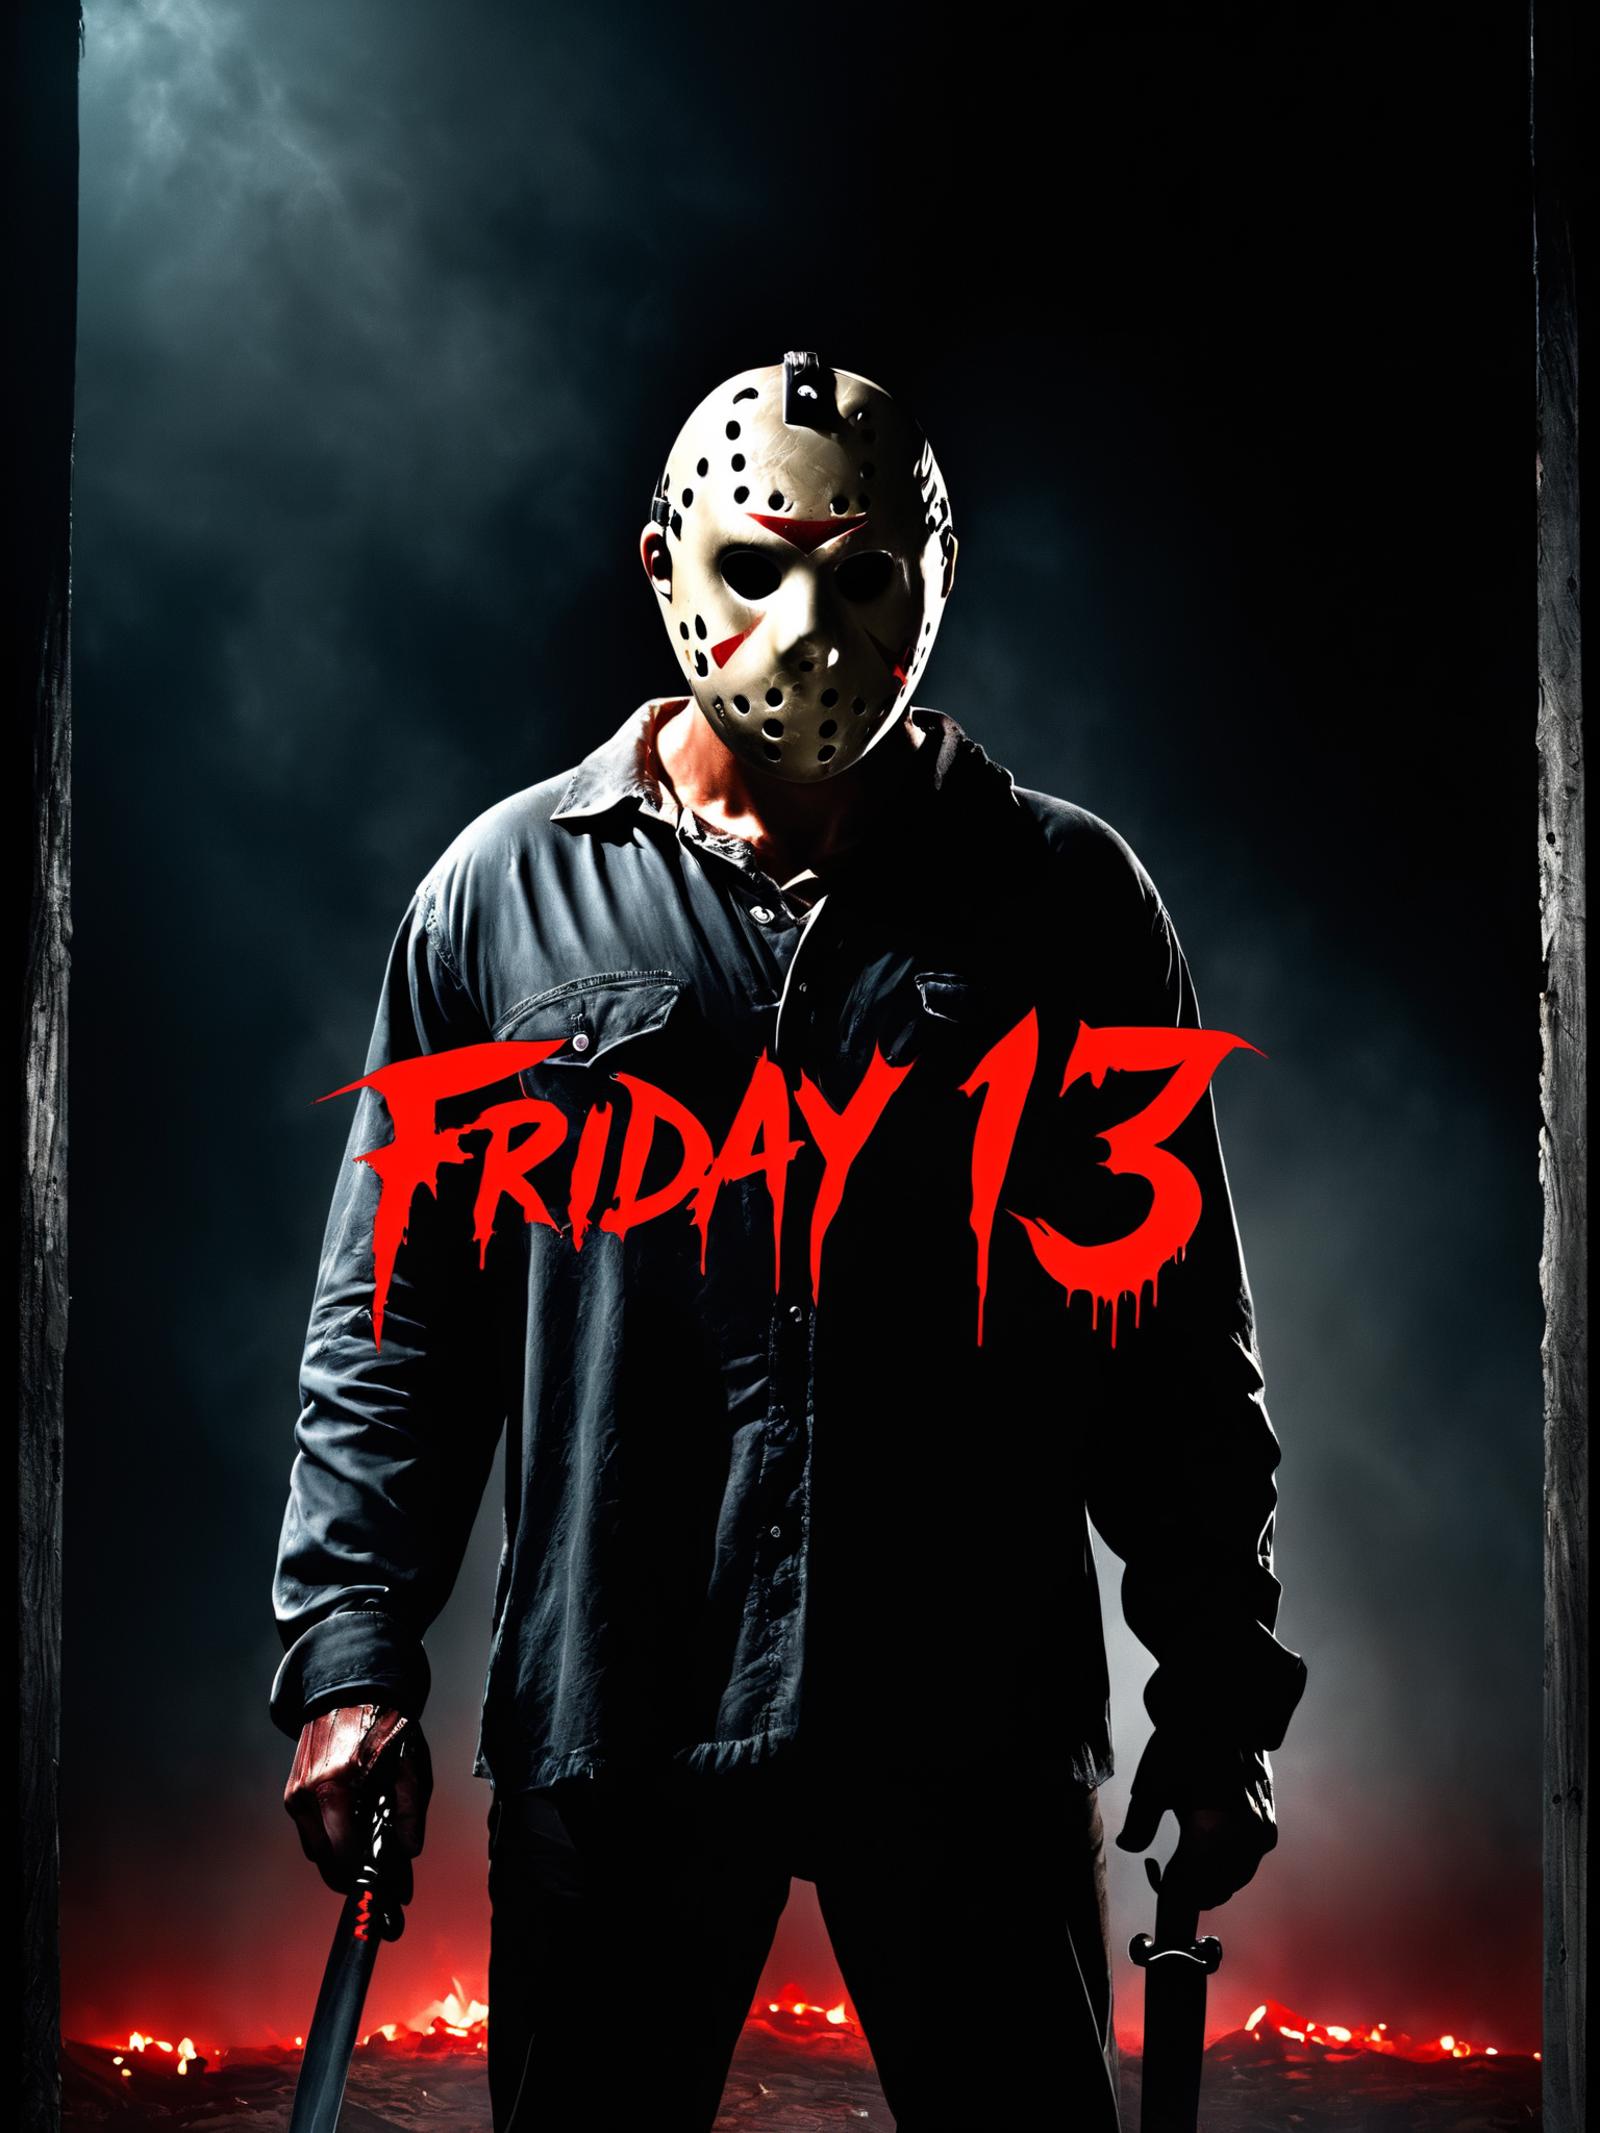 Friday the 13th Horror Movie Poster with a Masked Killer